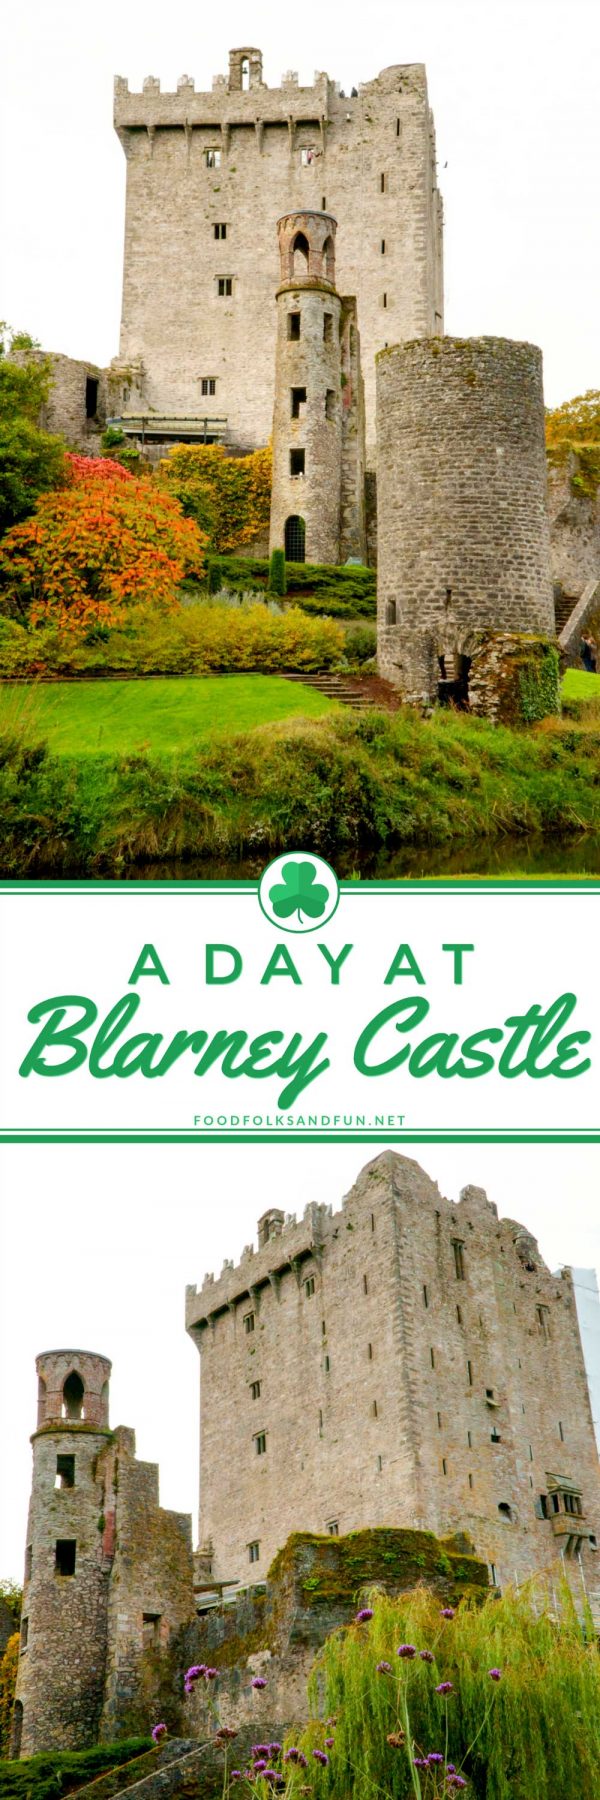 Visiting Blarney Castle and the castle grounds.